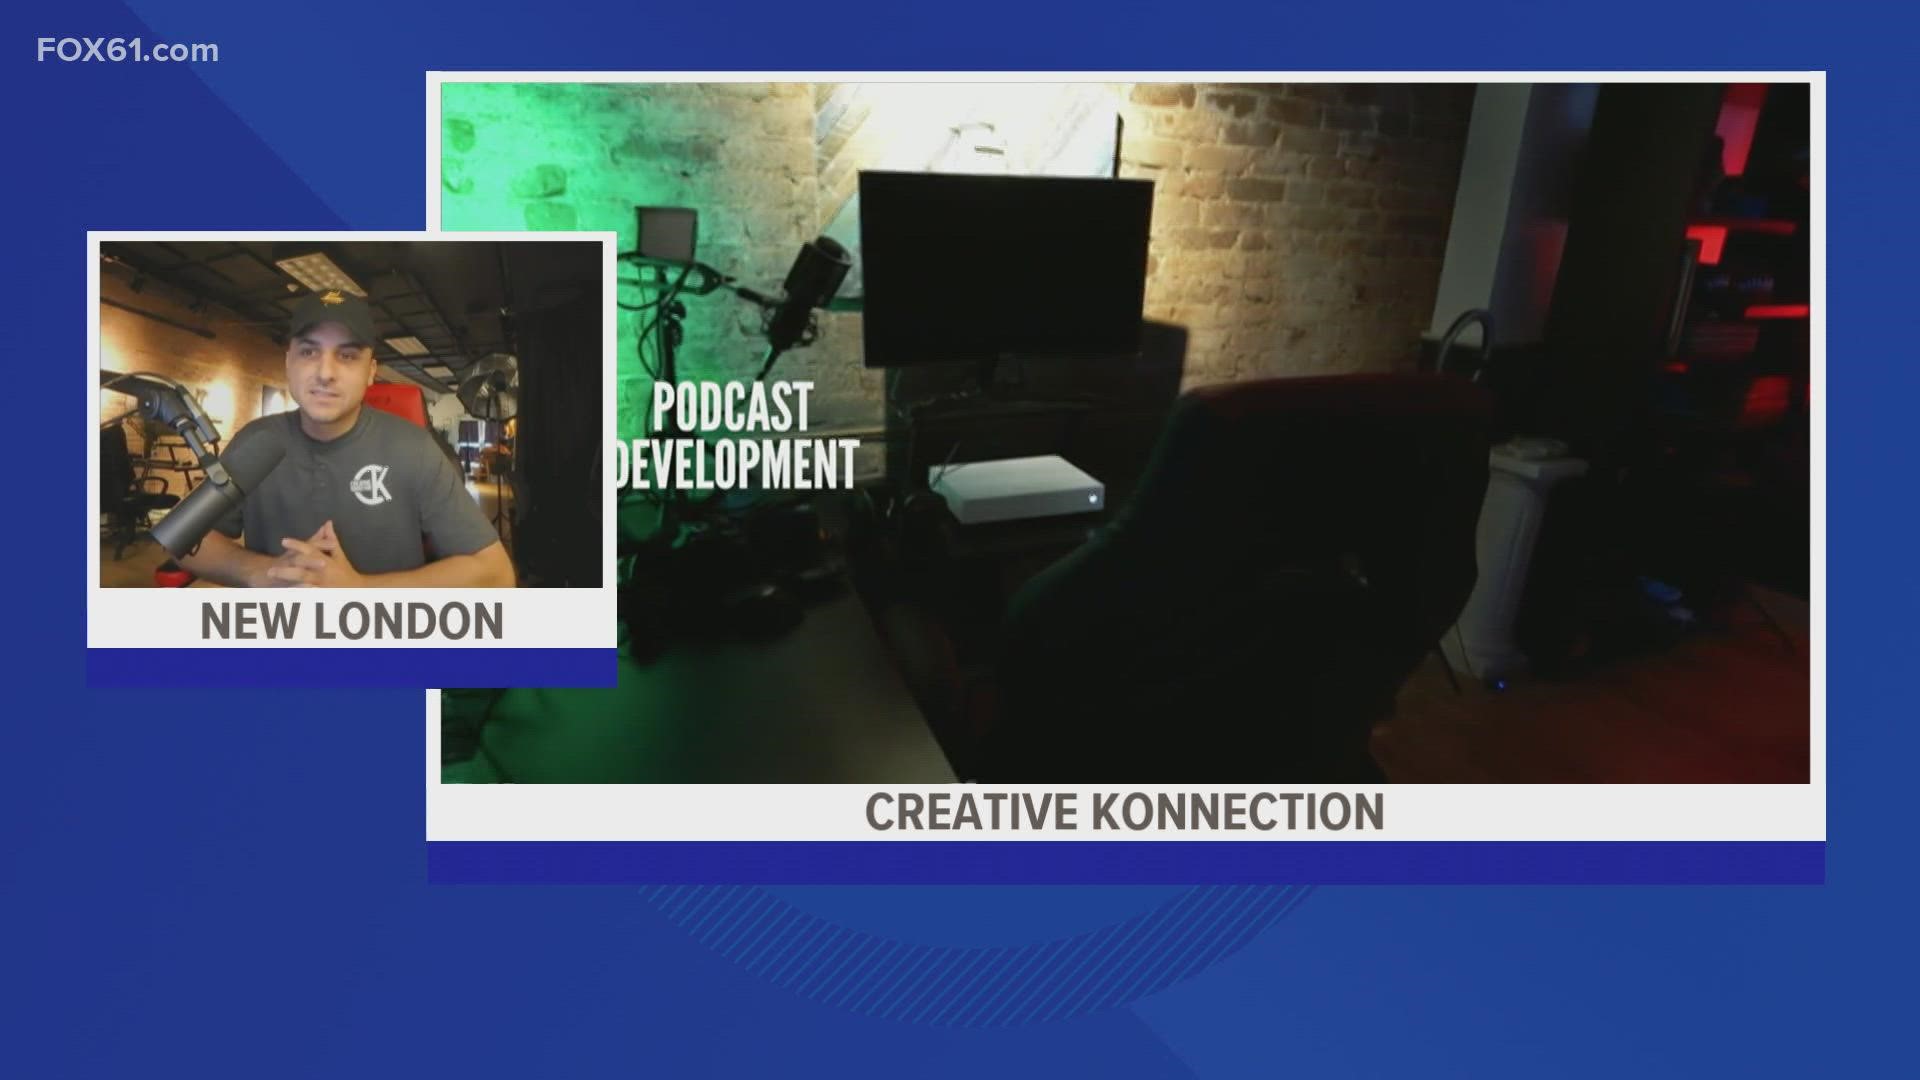 Joining FOX61's Erika Arias is Andrew Camacho from Creative Konnection, talking about how music has changed his life and how he's helping young people in New London.